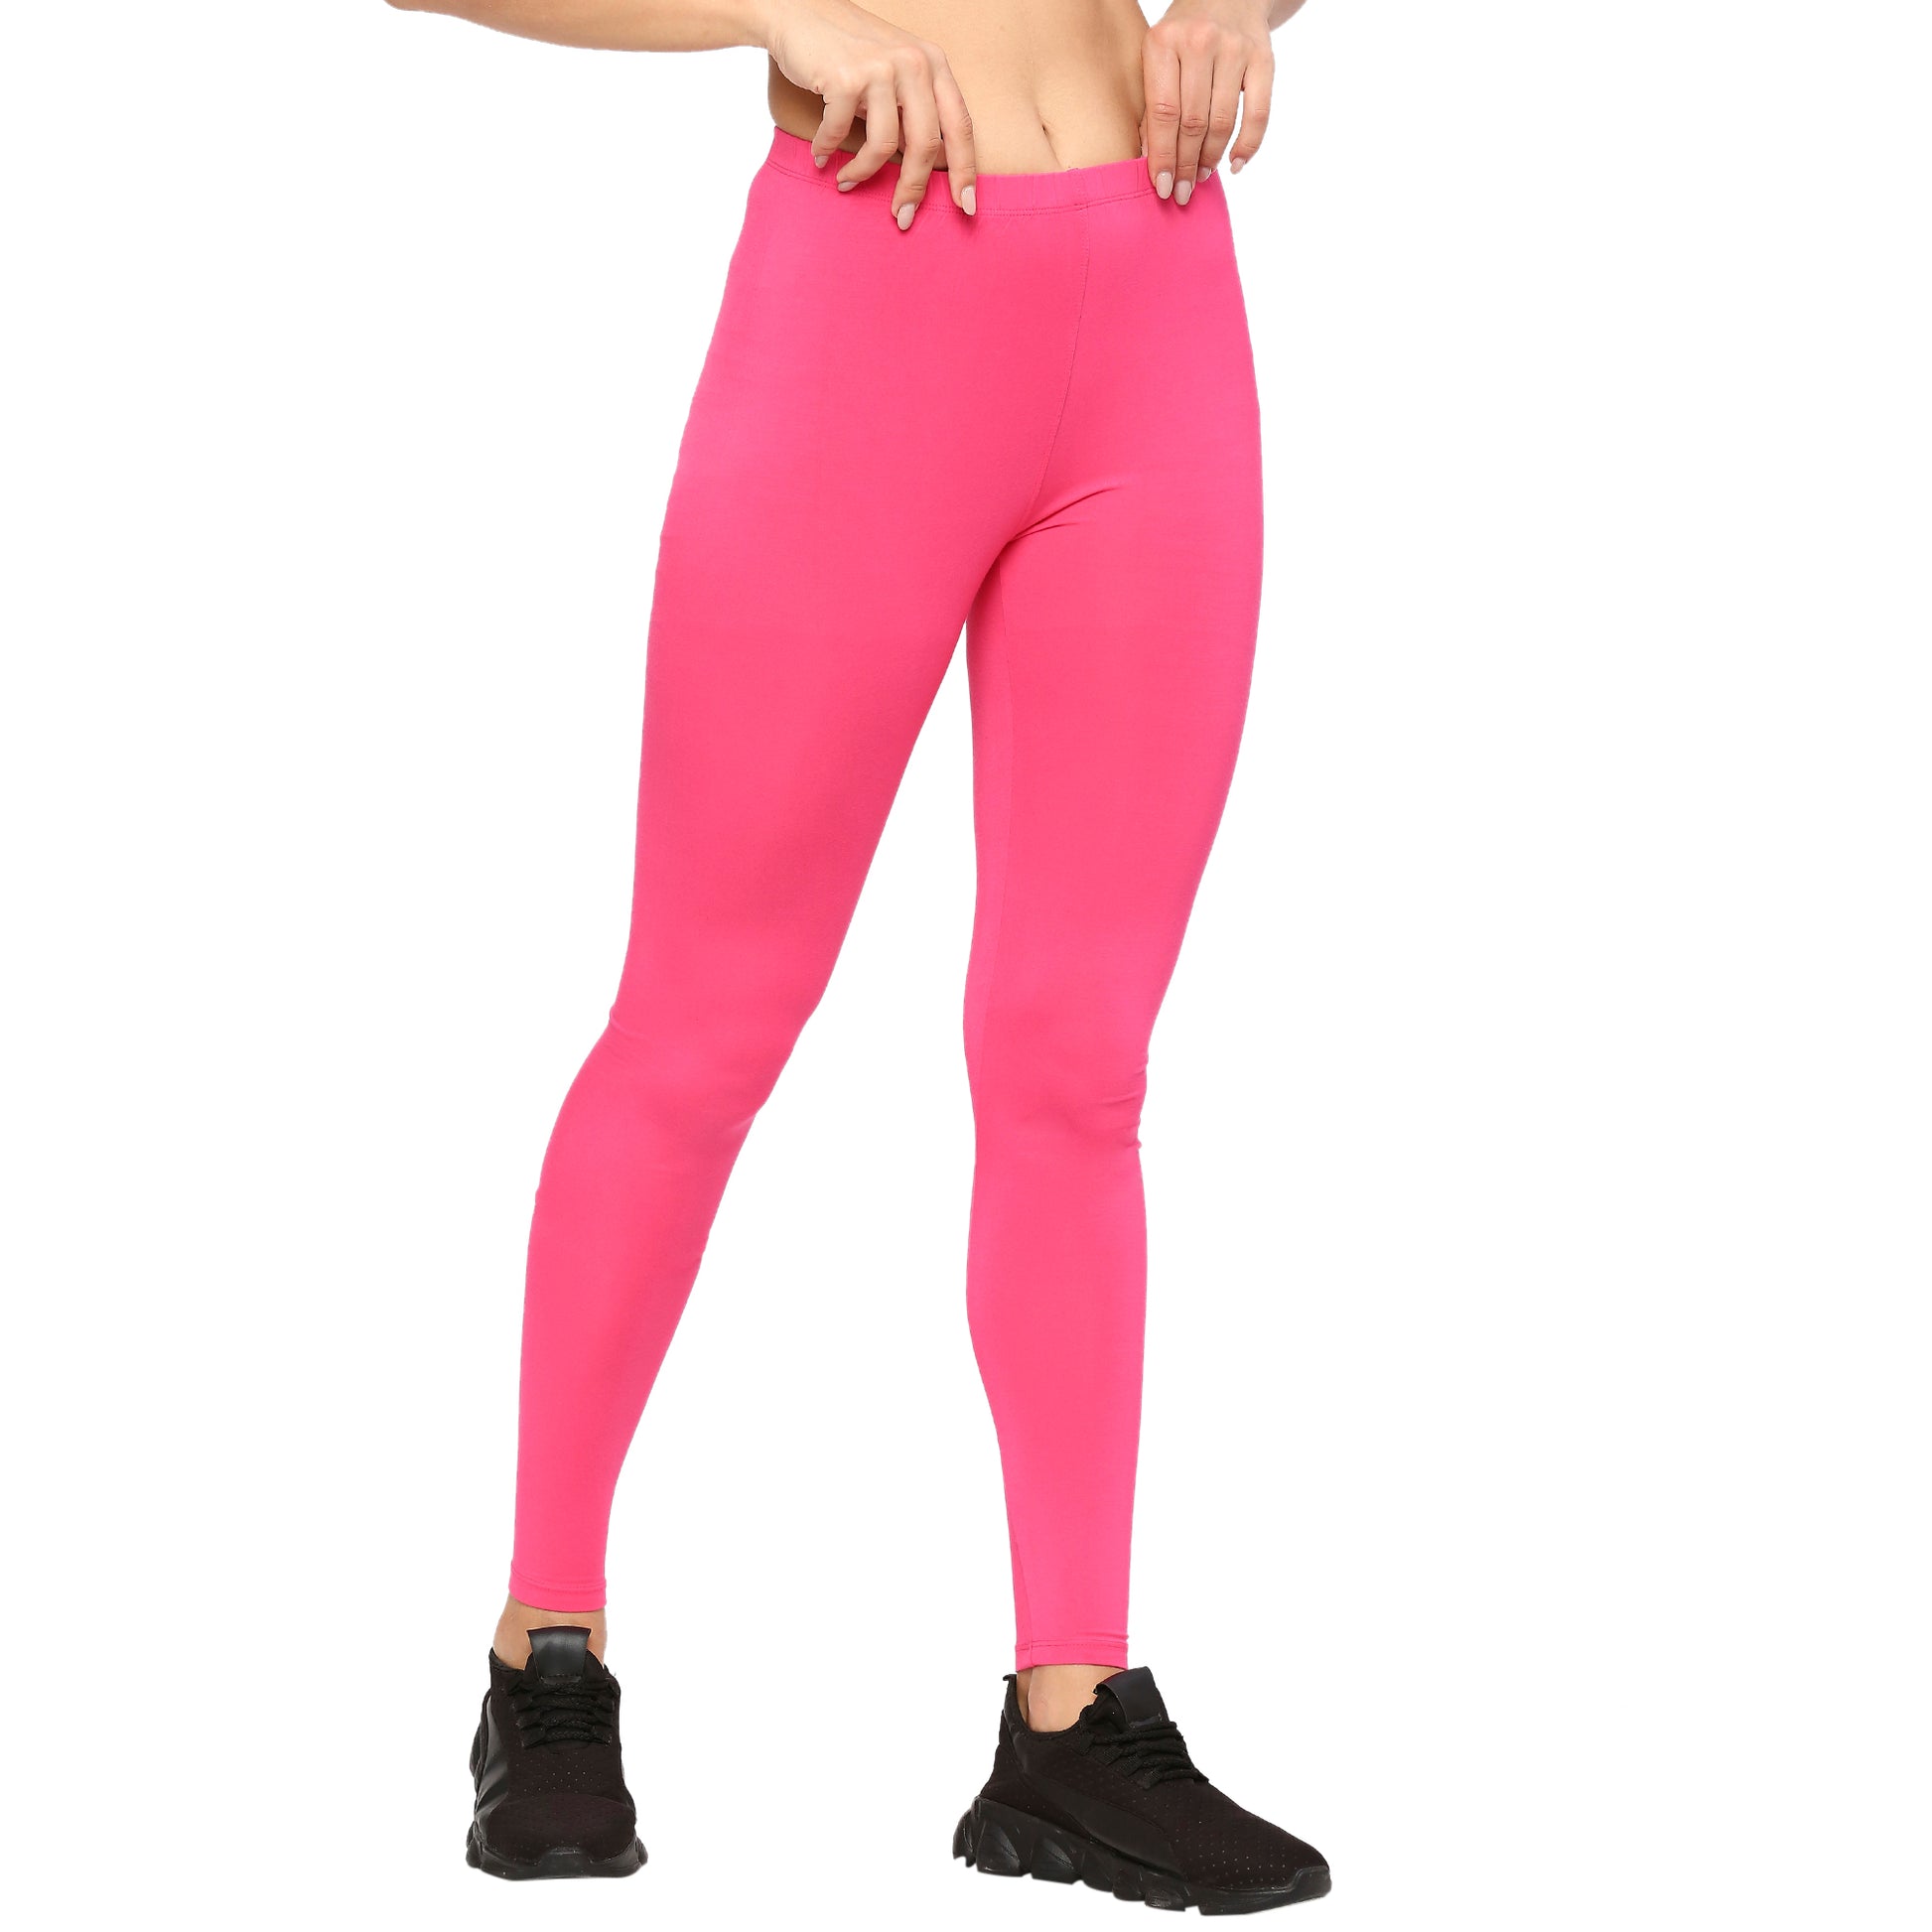 Buy LAASA Women's Solid Inner & Outer Wear Active Hot Shorts Rani Pink at